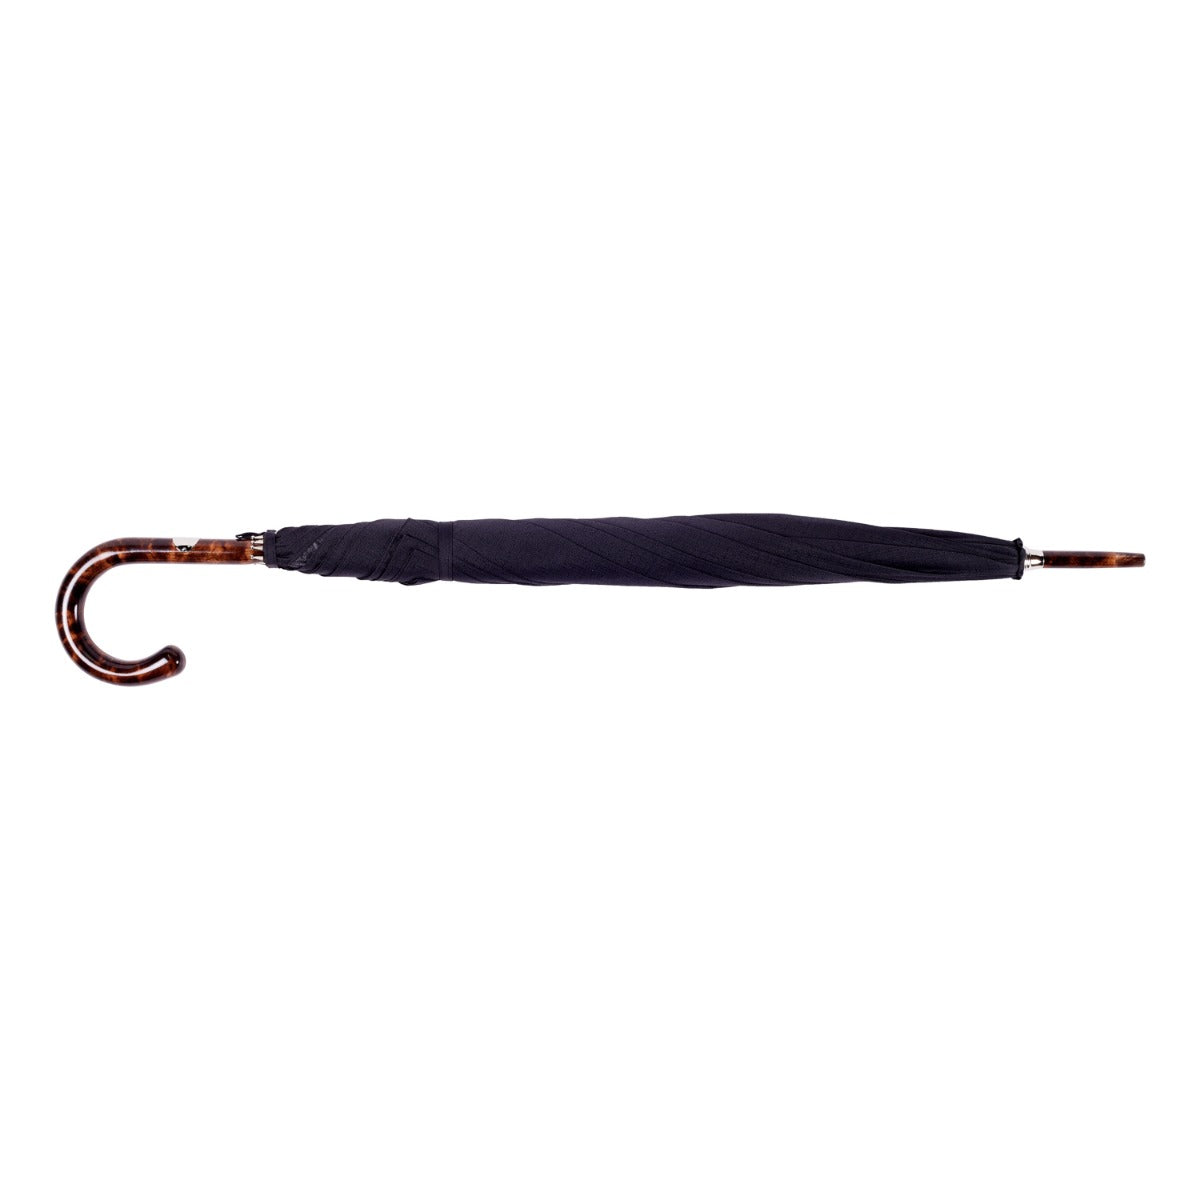 A Shiny Tiger Maple Handle w/ Imperial Black Canopy umbrella on a white background by KirbyAllison.com.